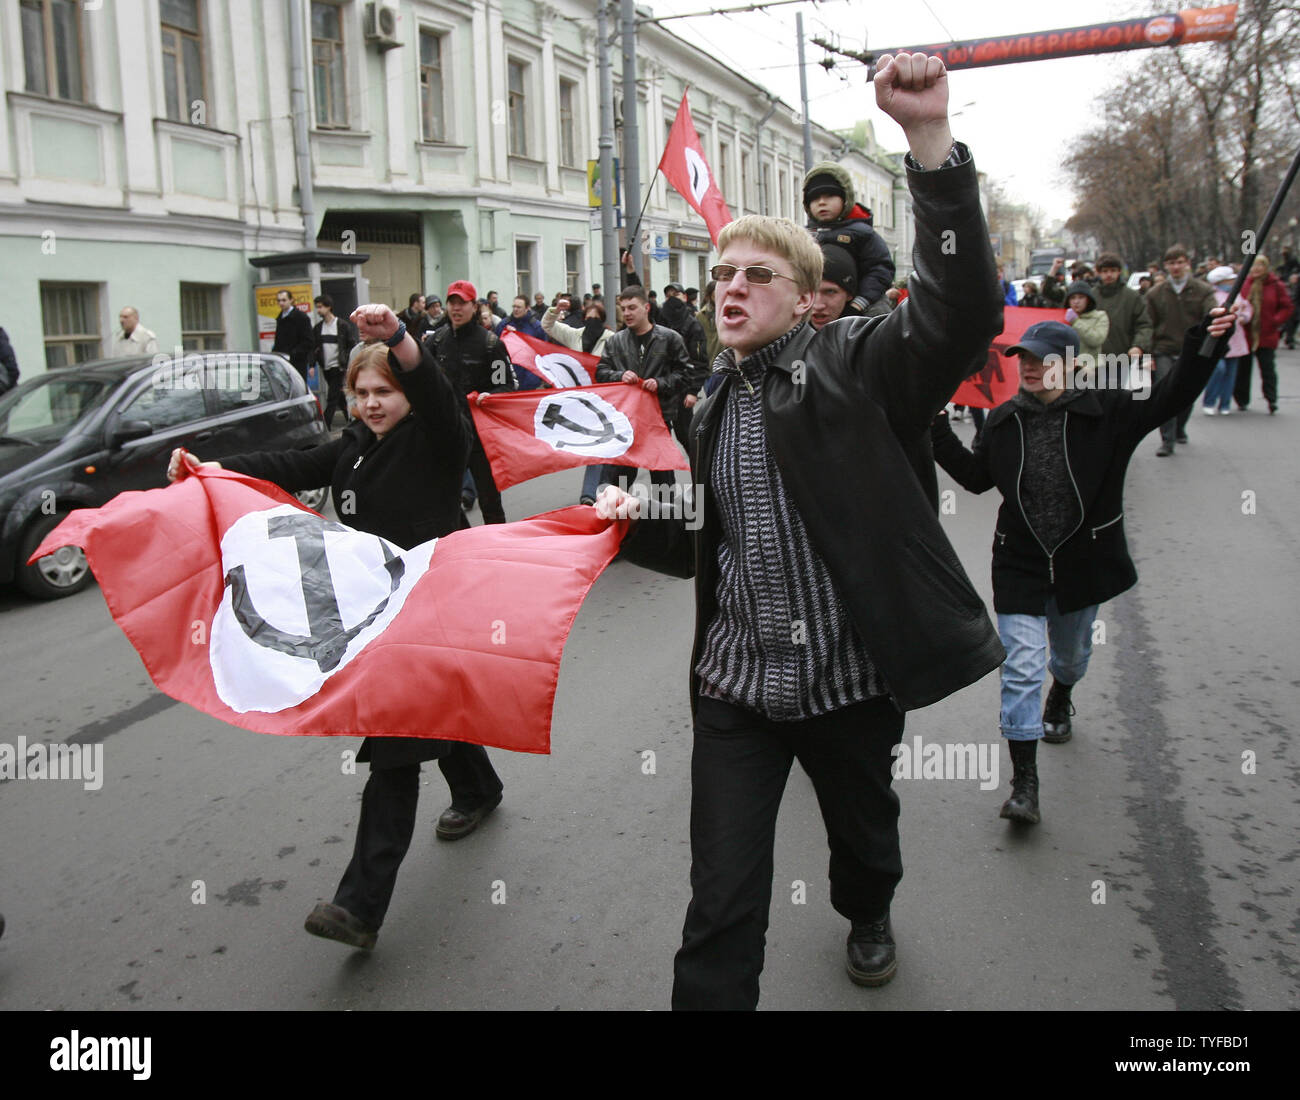 Protesters shout during an opposition rally downtown Moscow on April 14, 2007. Police detained Russian opposition leader Garry Kasparov, the former world chess champion, and more than 100 other activists Saturday as they gathered for a forbidden anti-Kremlin demonstration in central Moscow. (UPI Photo/Anatoli Zhdanov) Stock Photo